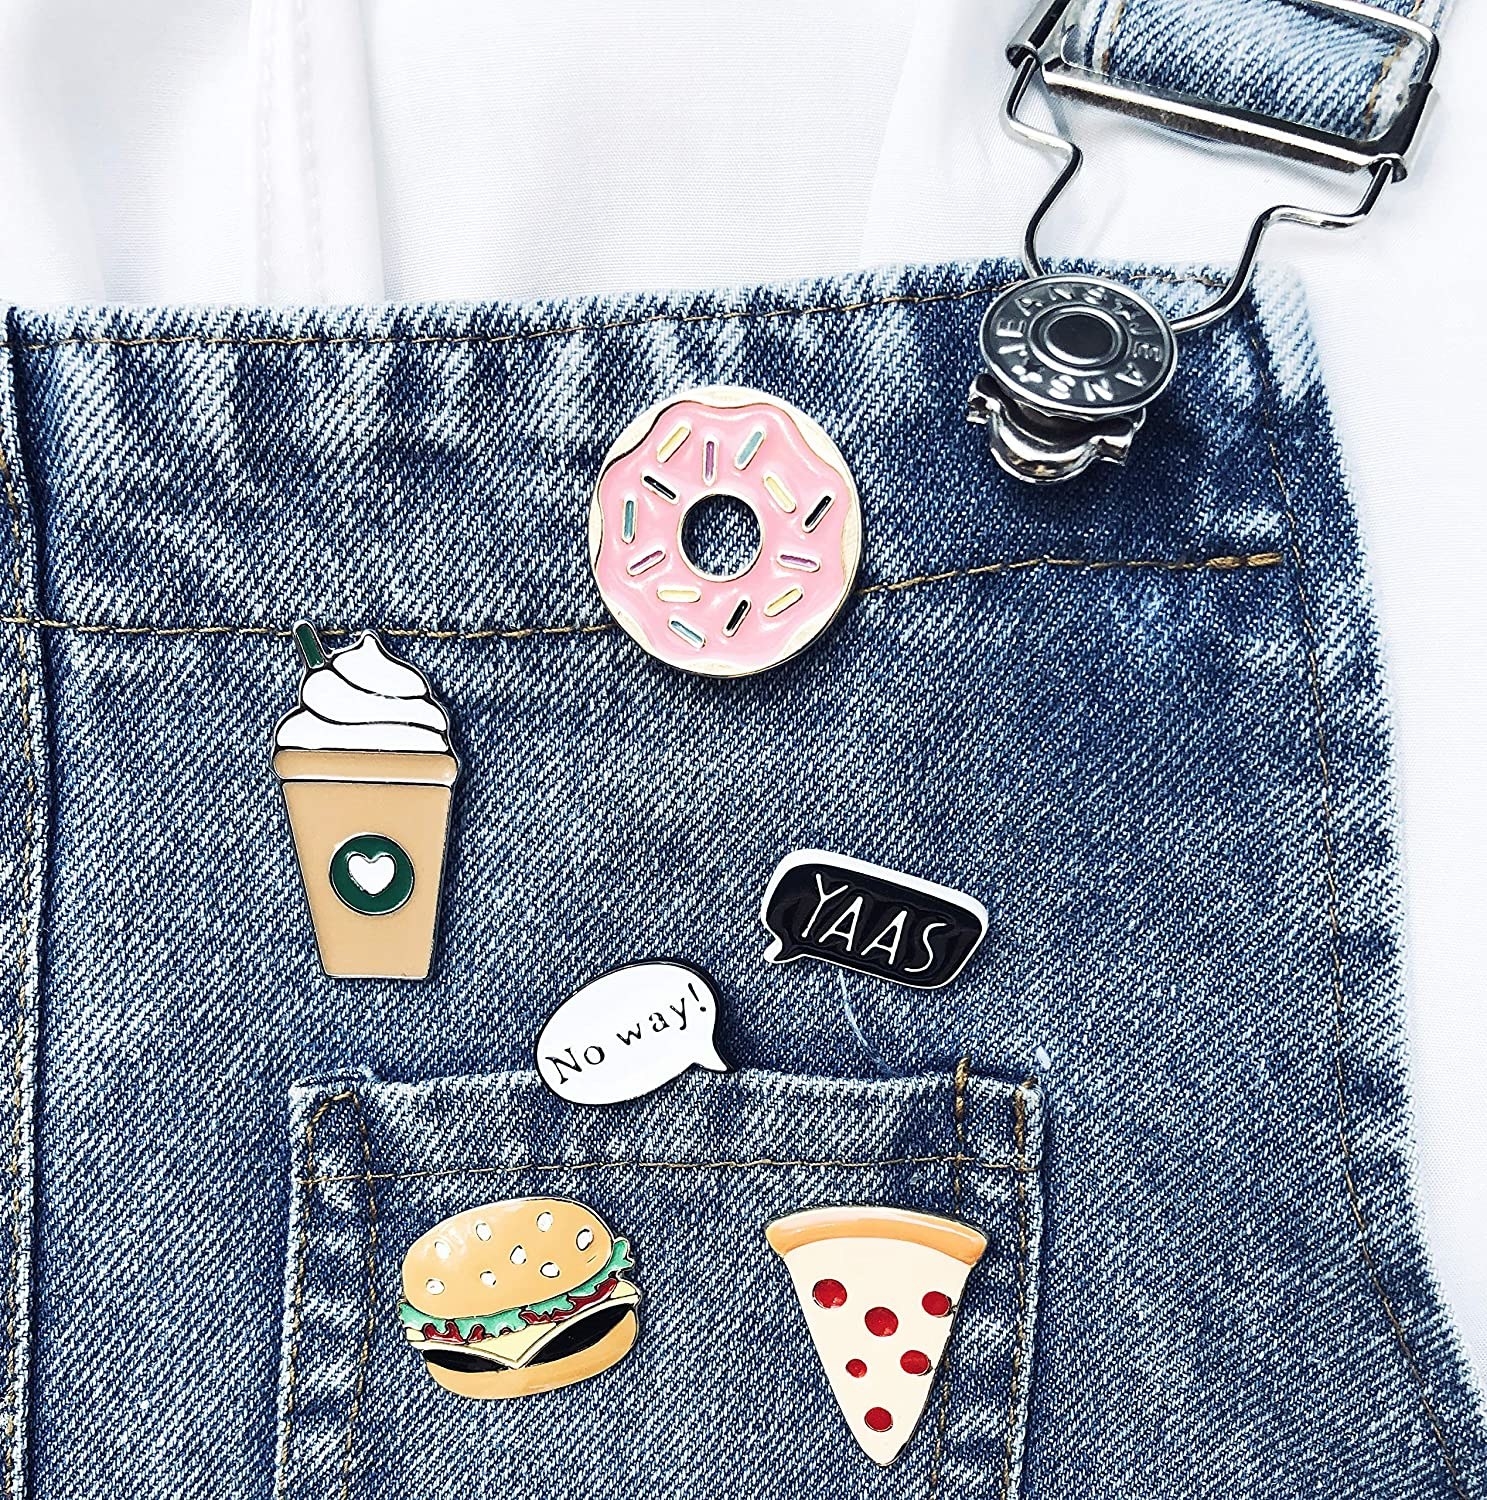 the pins are a donut, burger, pizza slice, coffee cup, the word &quot;yaas&quot; and &quot;no way&quot; 